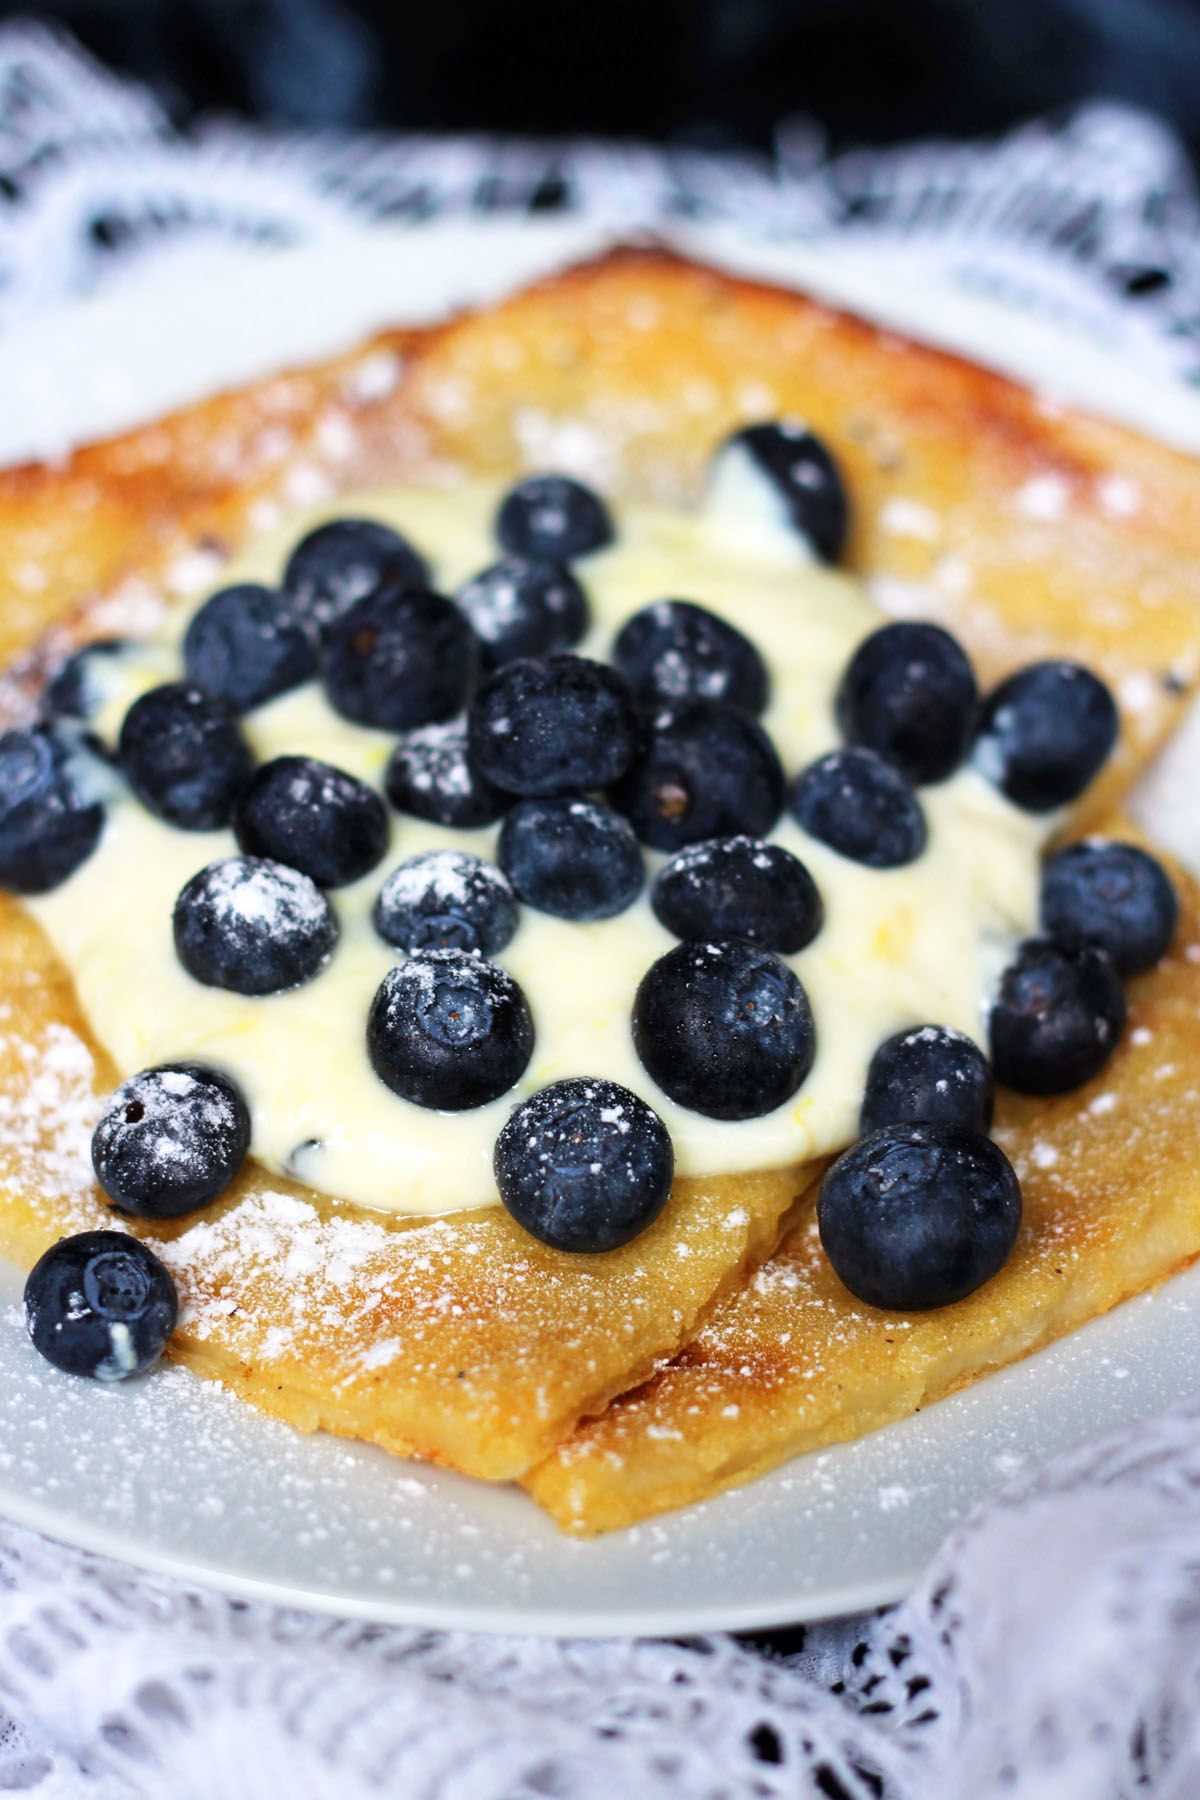 Oven Baked Pancakes are a traditional Scandinavian dish best served with yogurt and fresh blueberries